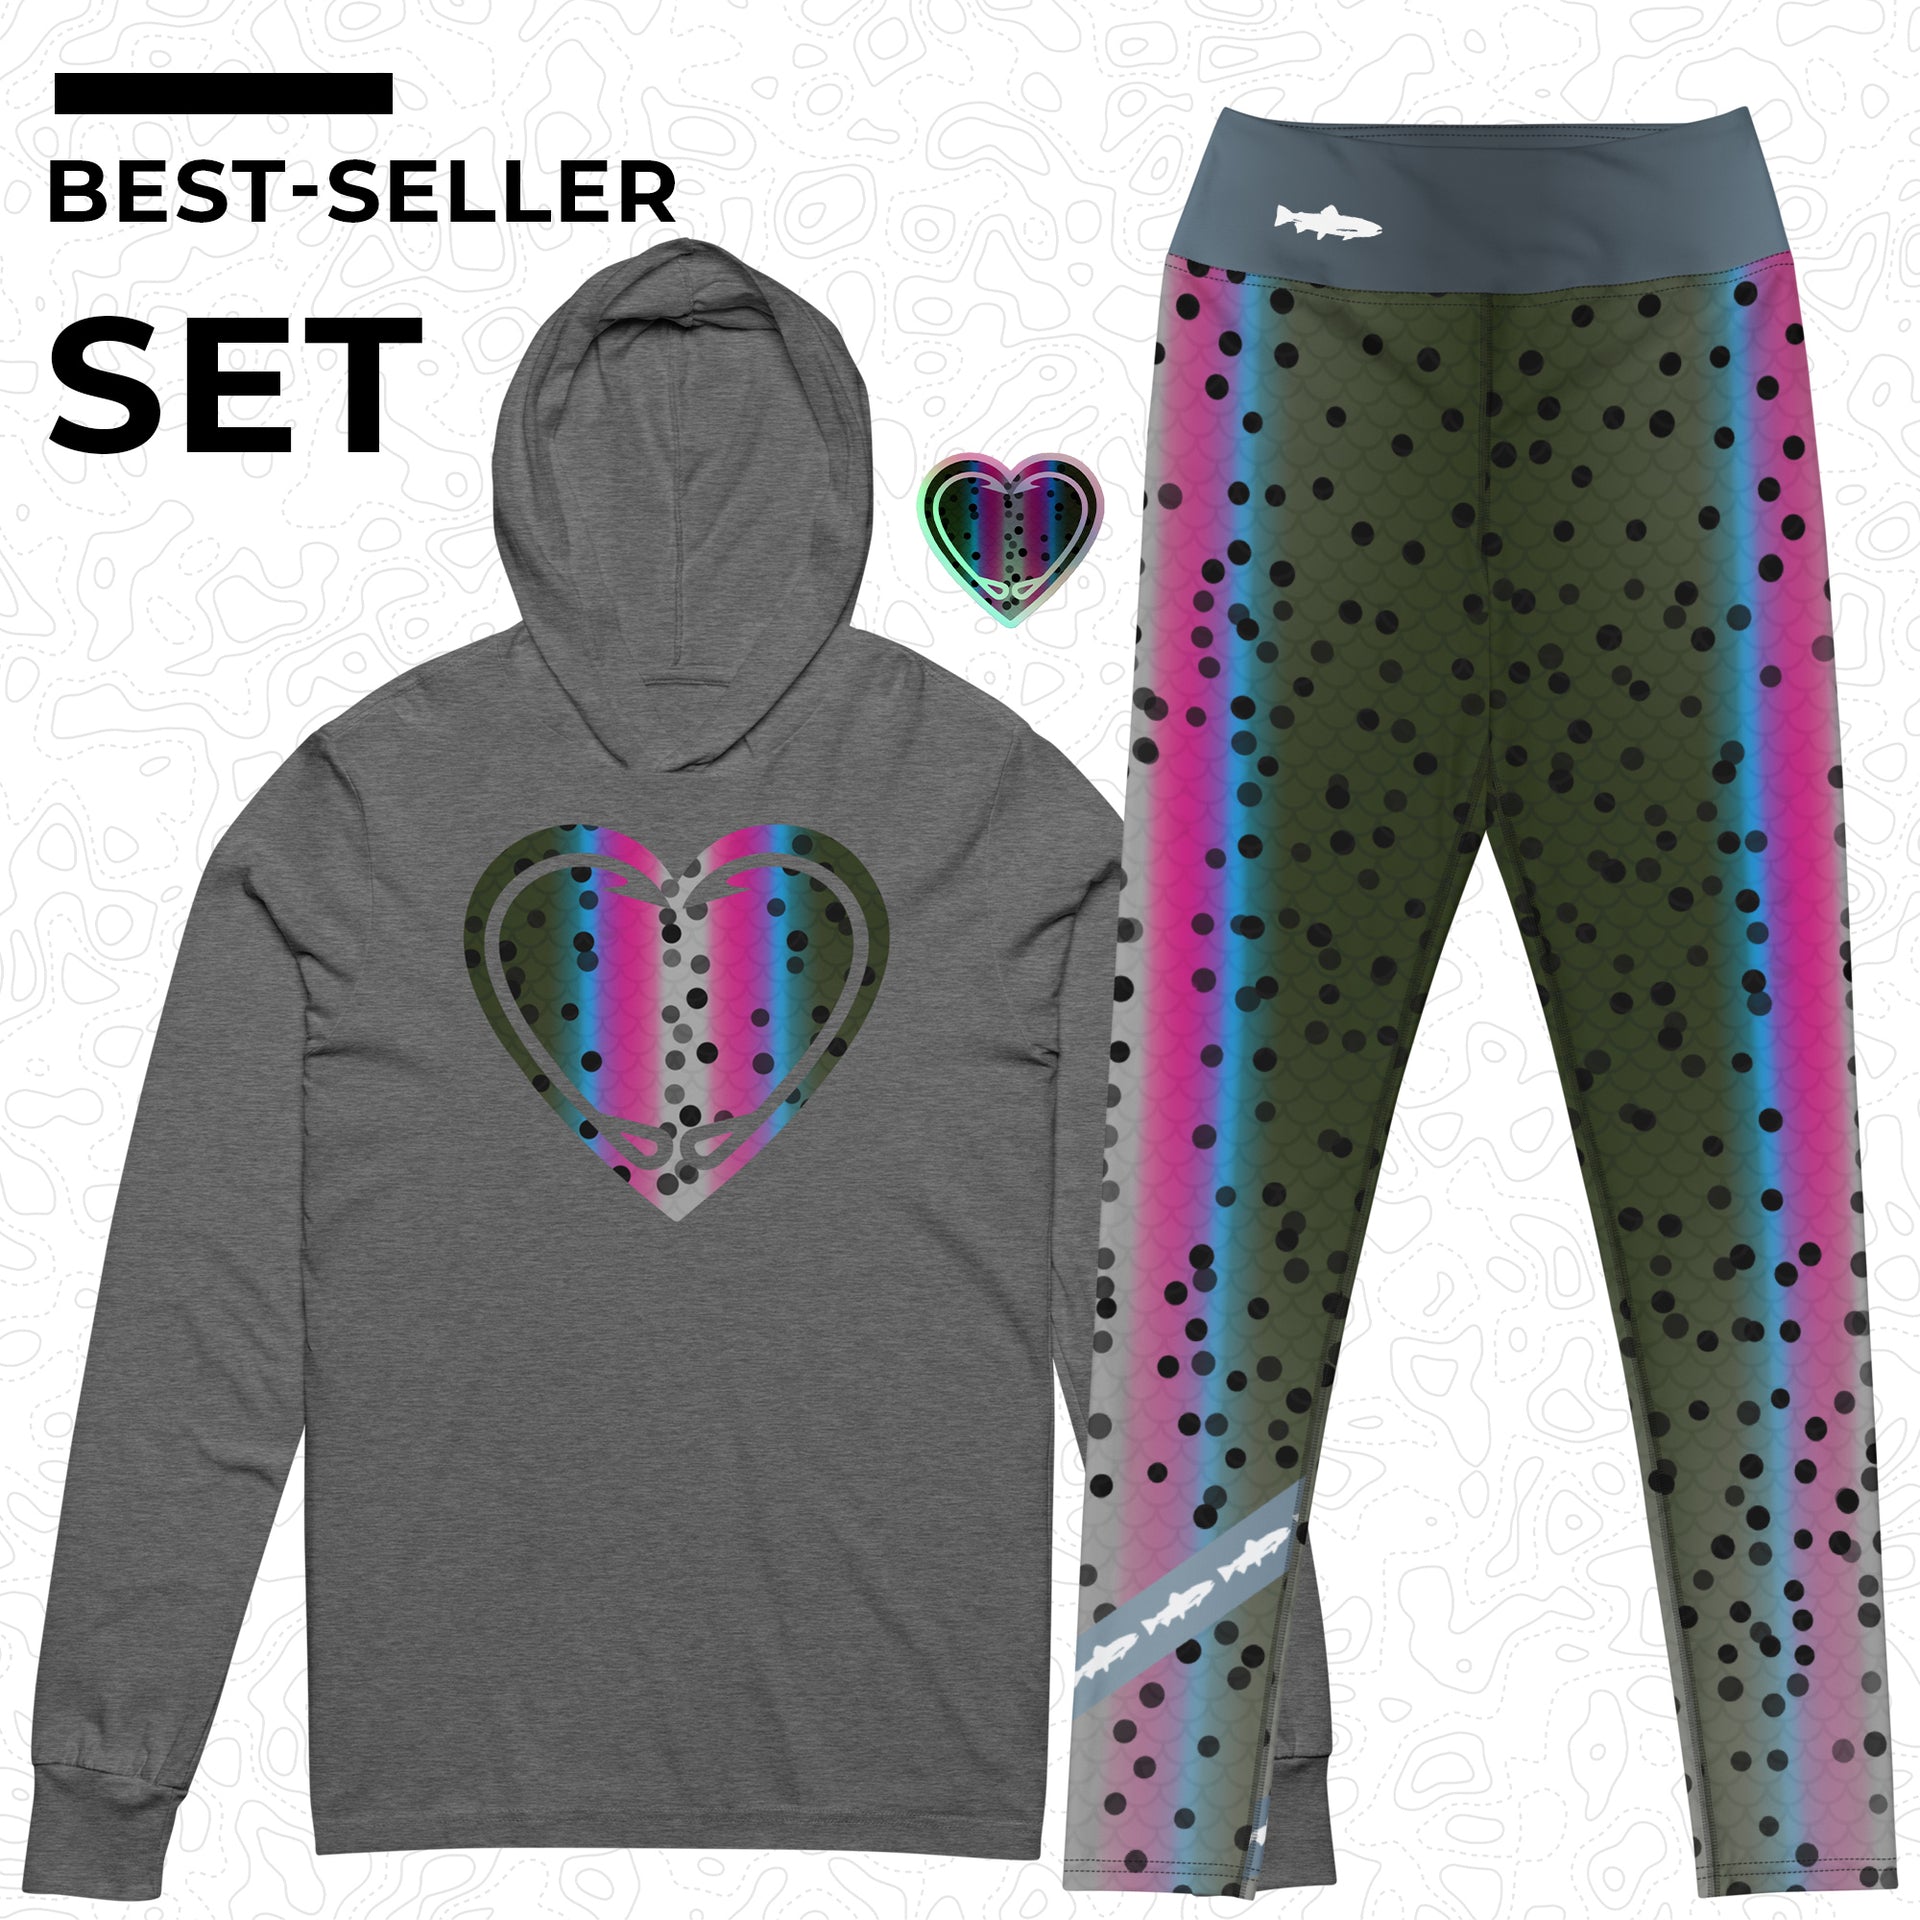 Rainbow Trout - Youth Leggings